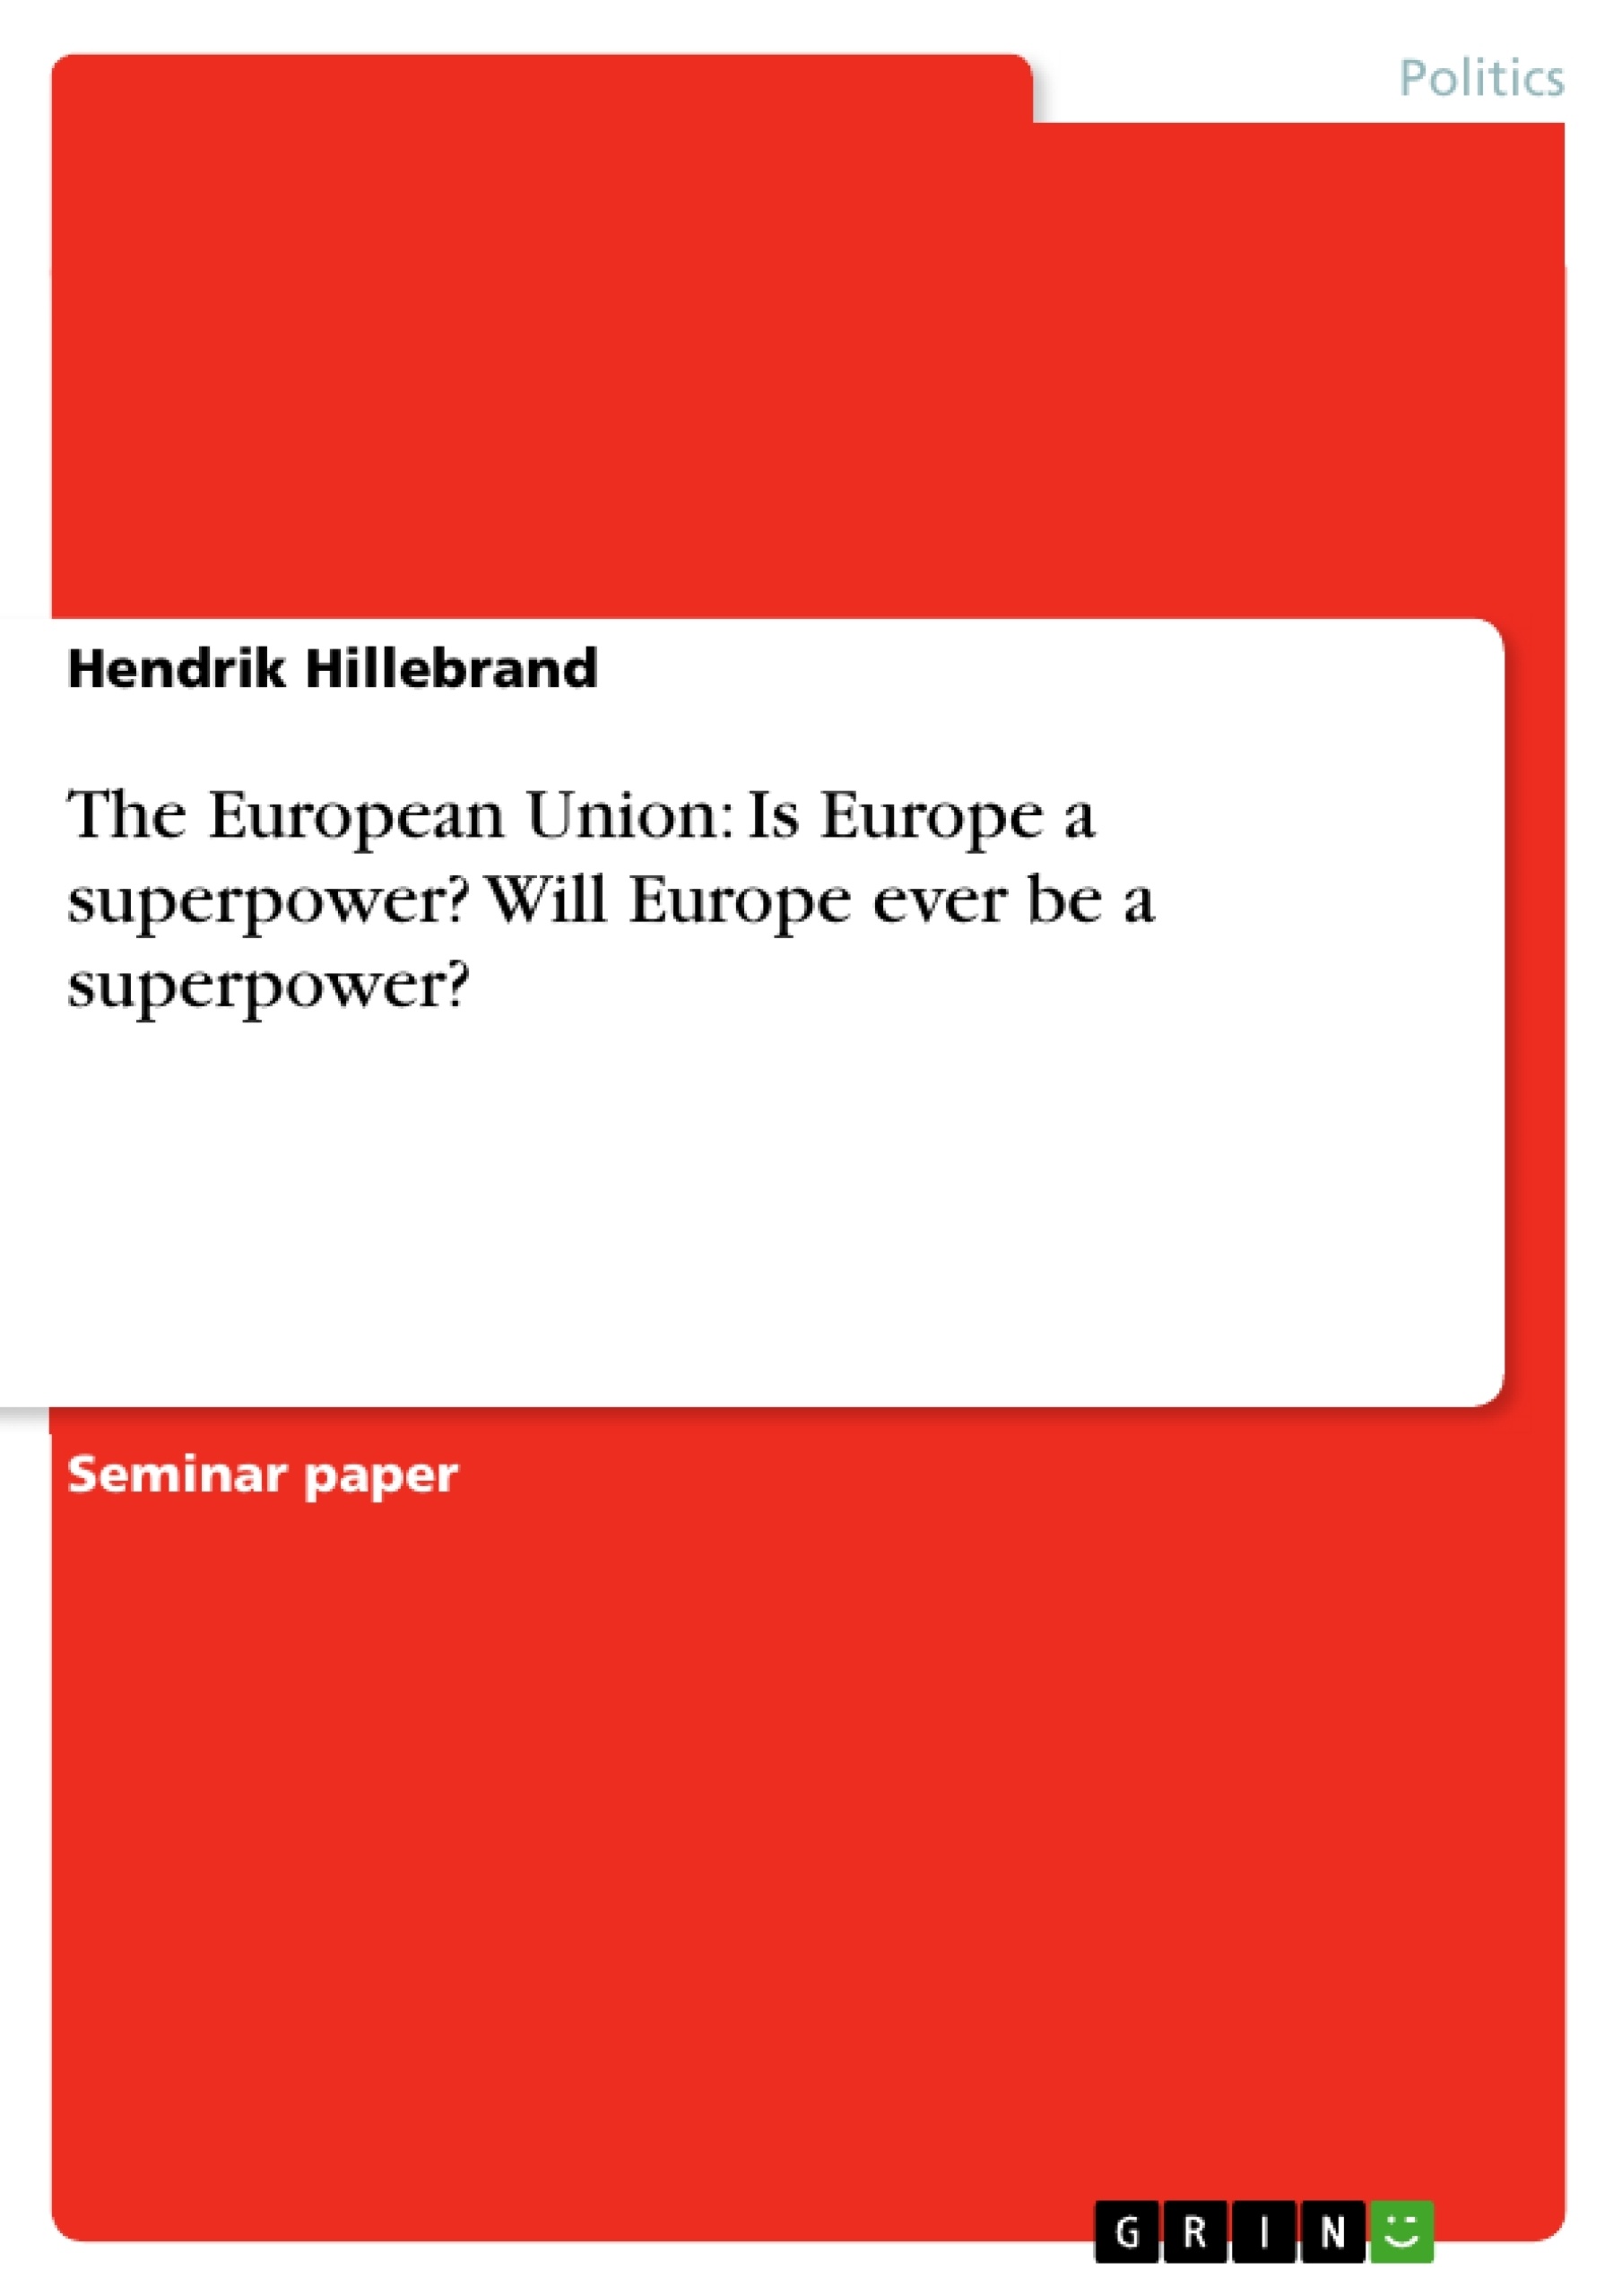 Título: The European Union: Is Europe a superpower? Will Europe ever be a superpower?